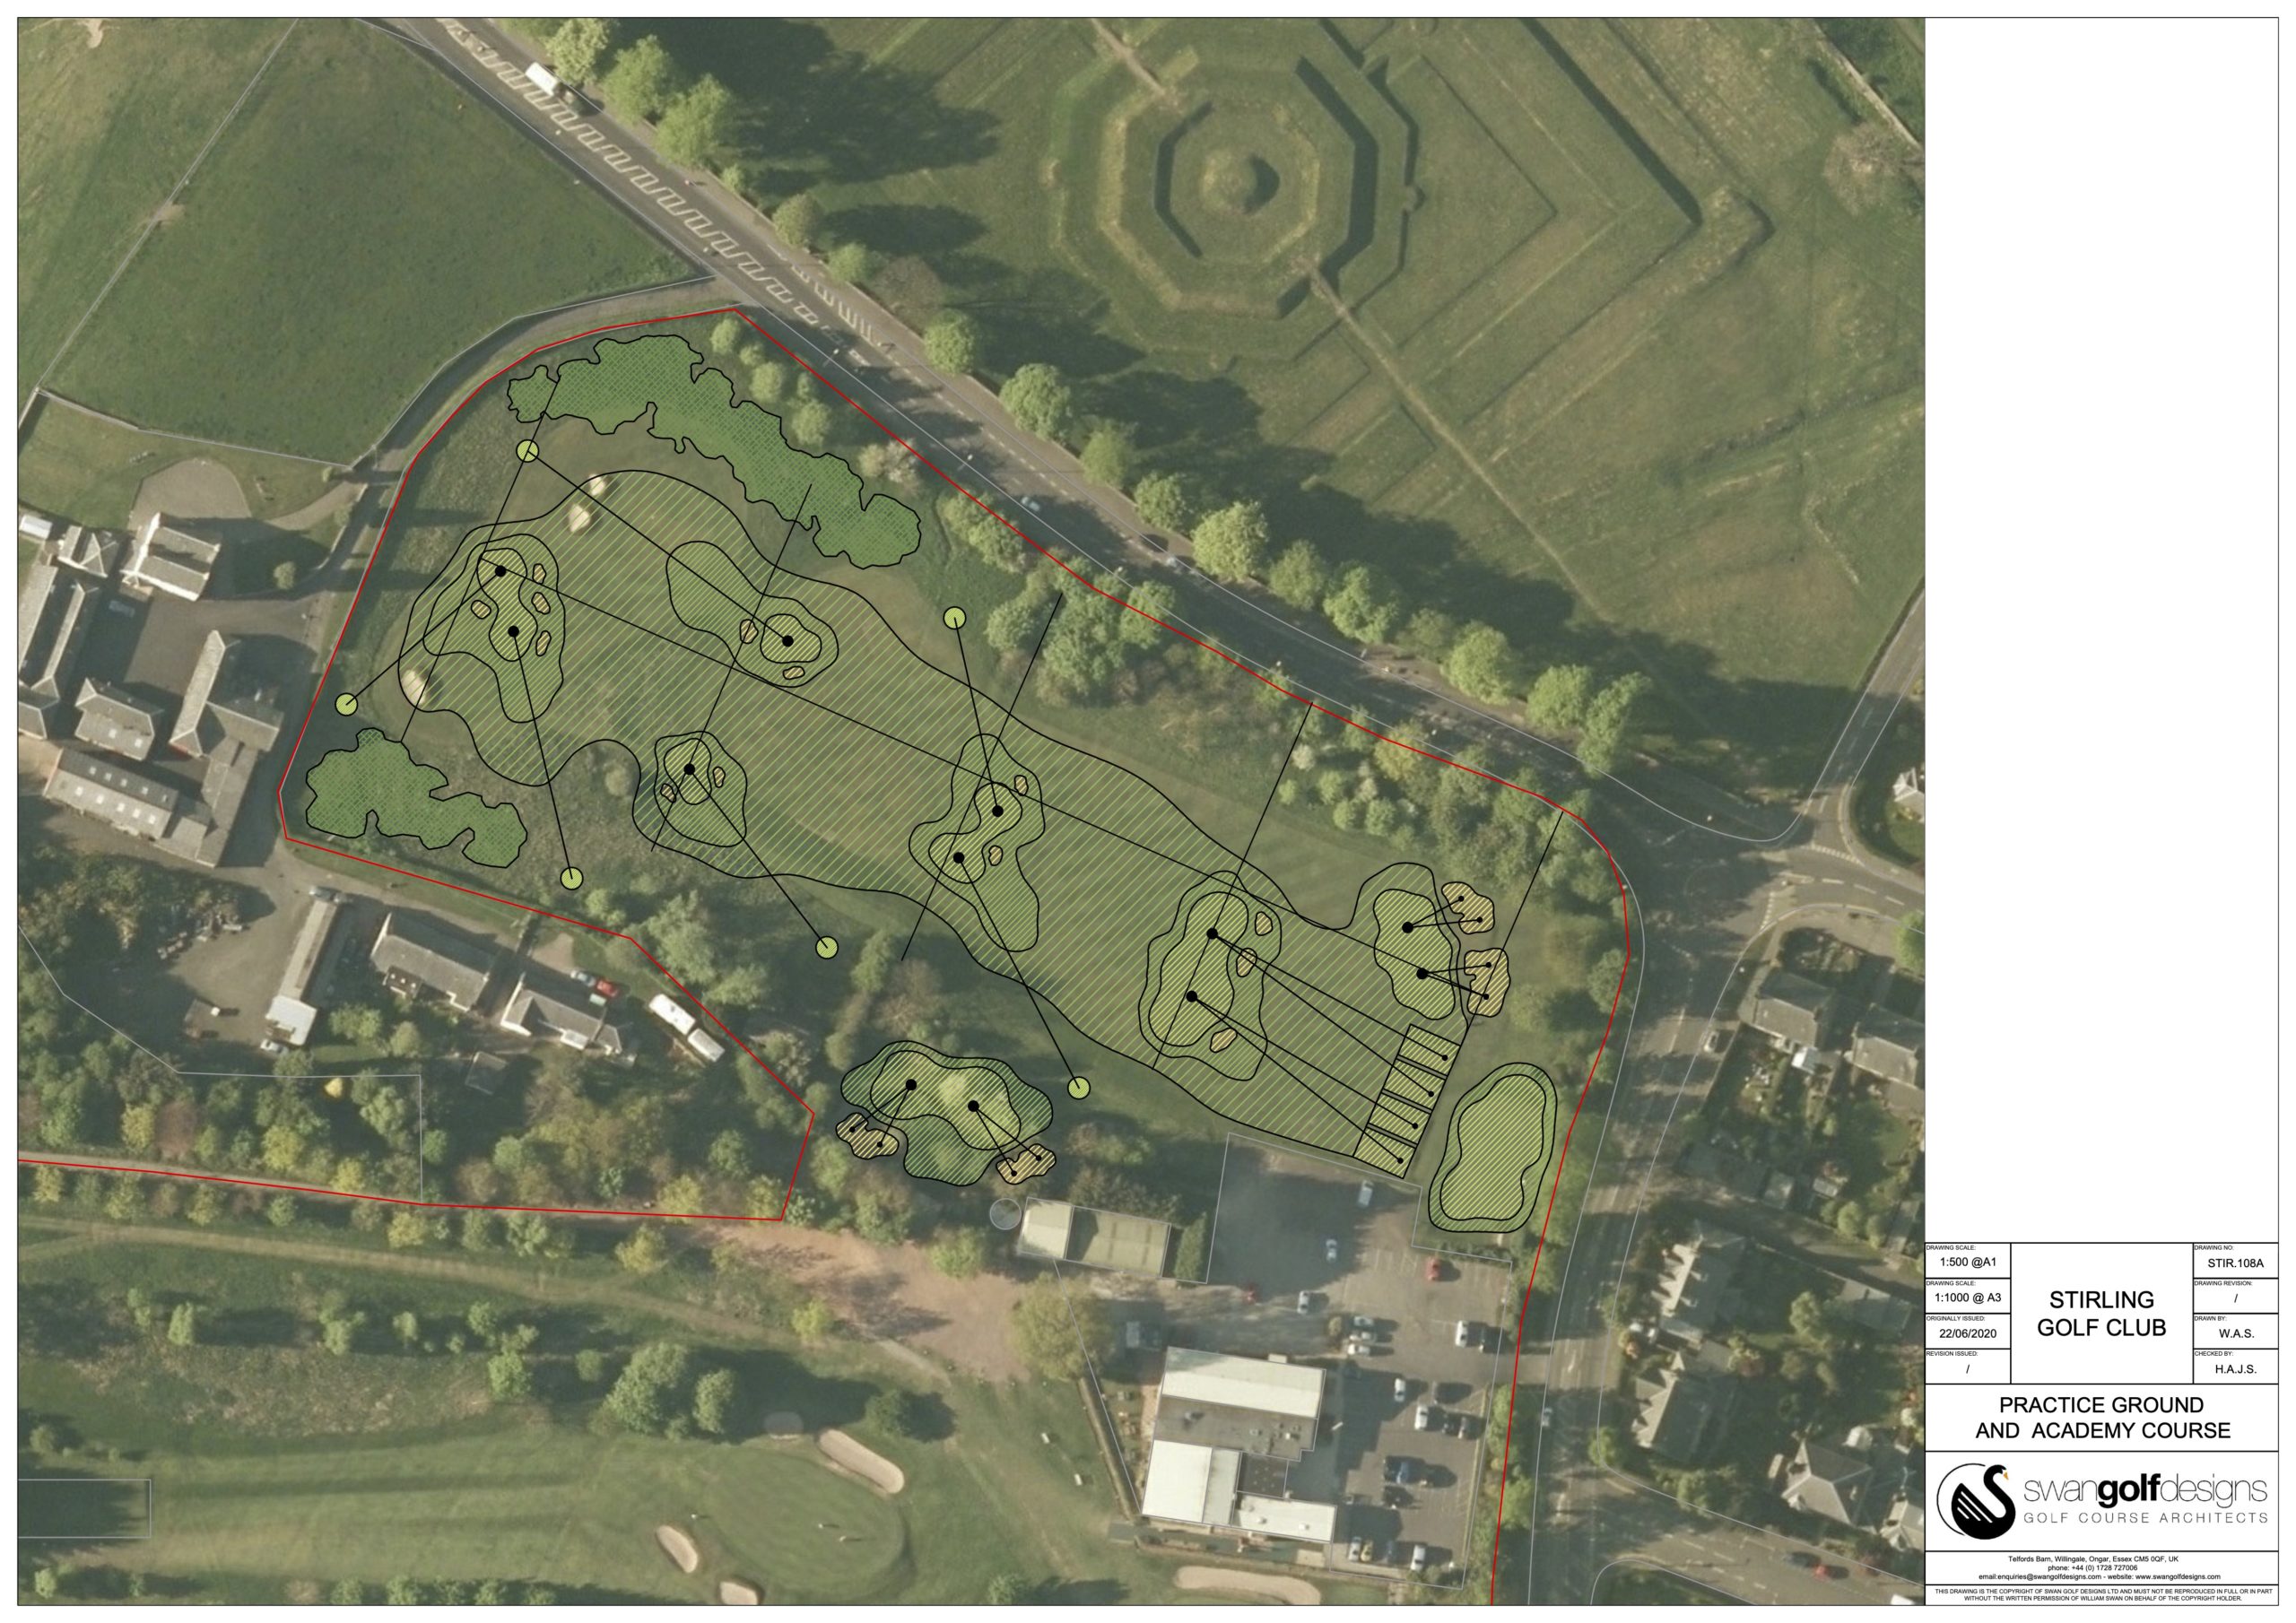 Stirling Golf Club Practice Ground and Academy Course